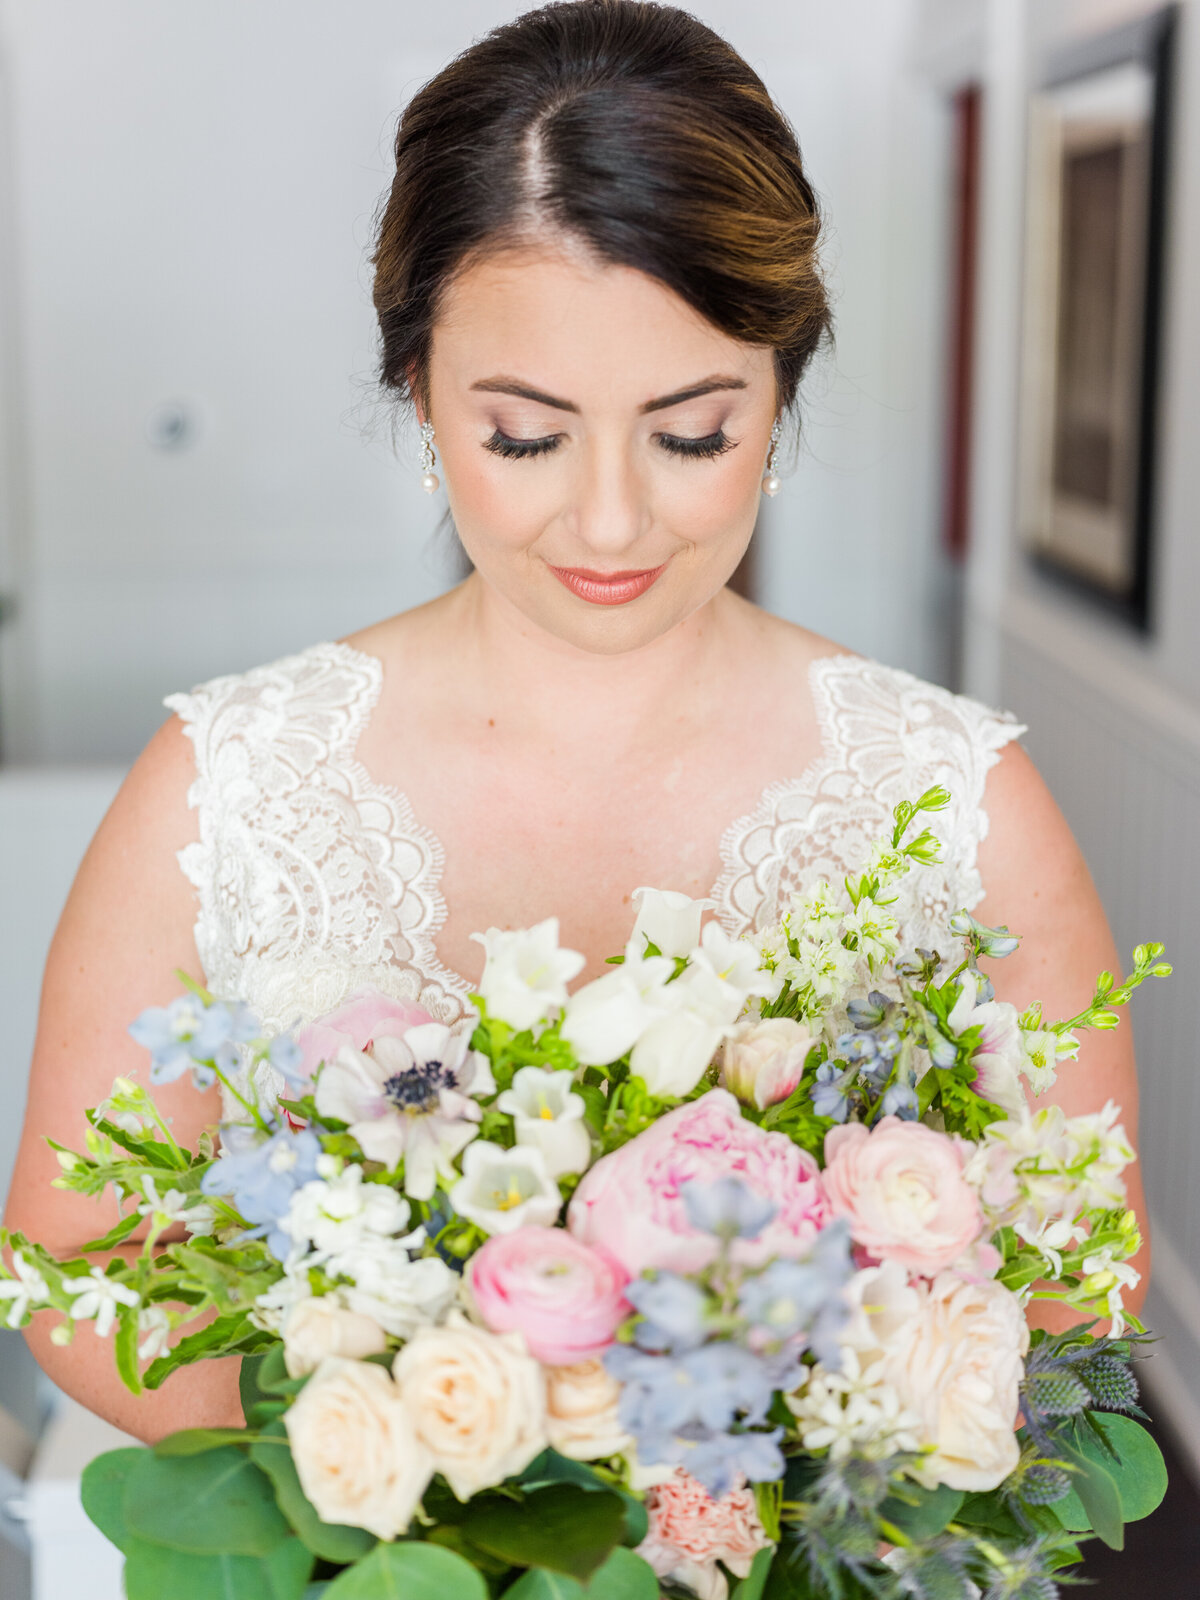 Bride looking down at her wedding bouquet